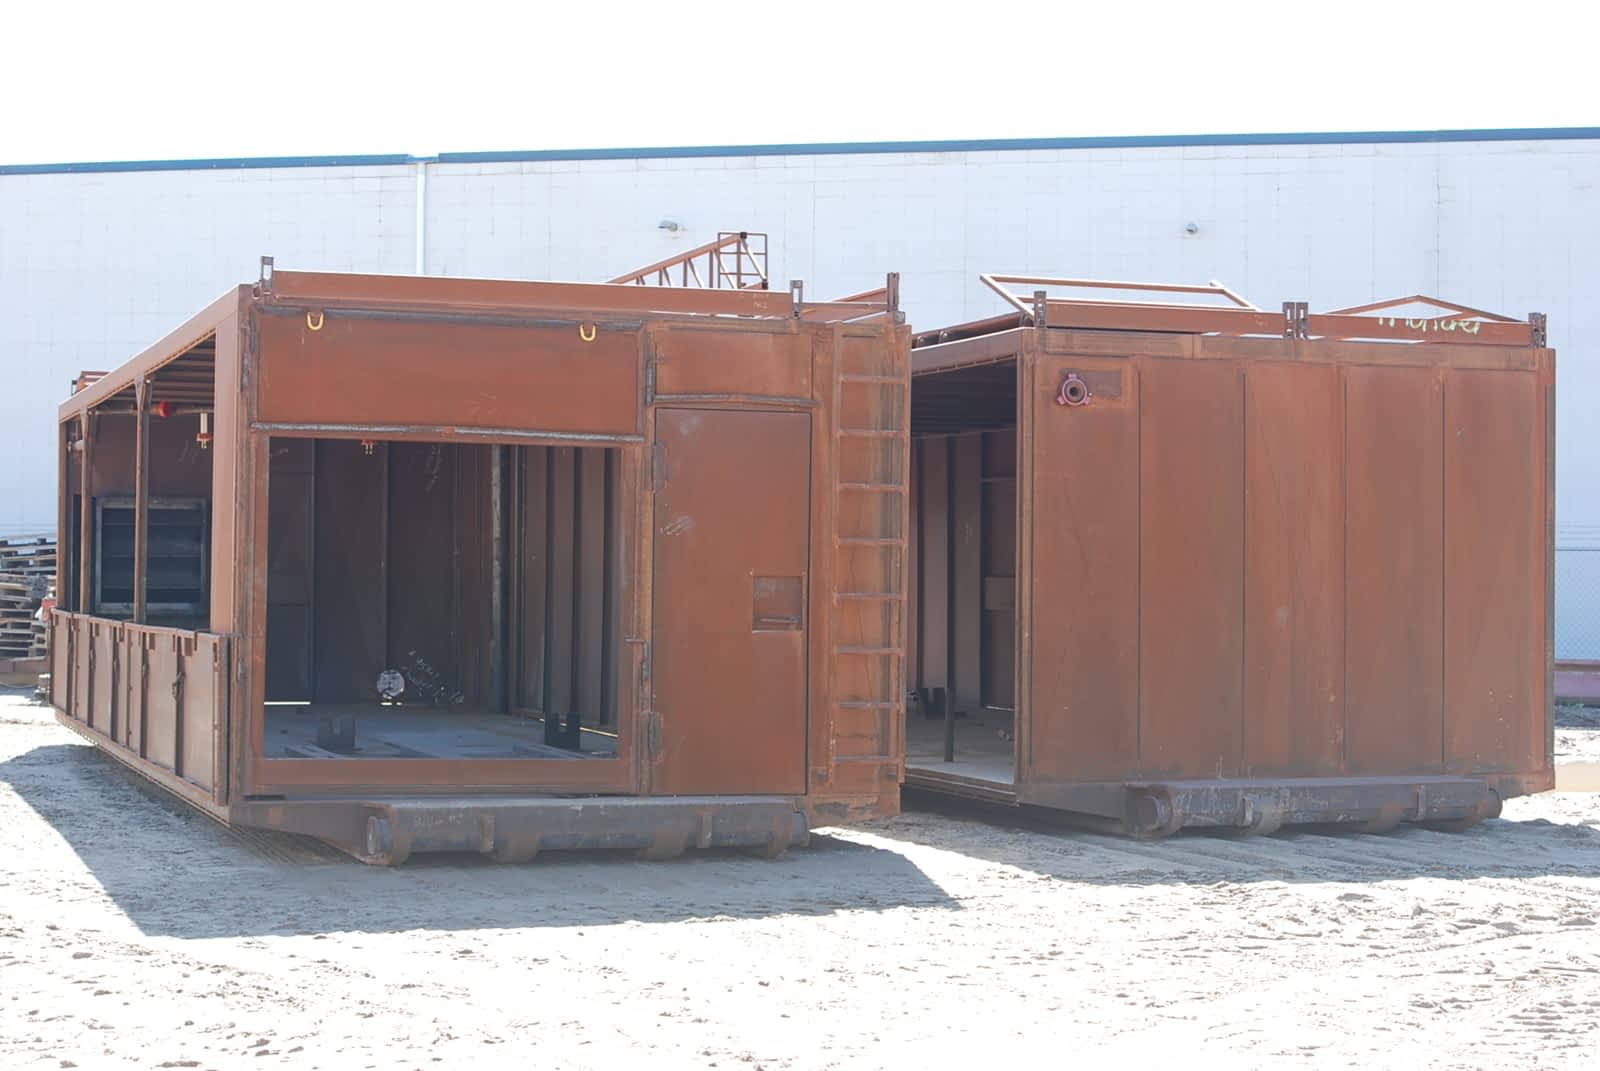 Two unpainted, rusty new construction drilling rig generator
                    buildings.